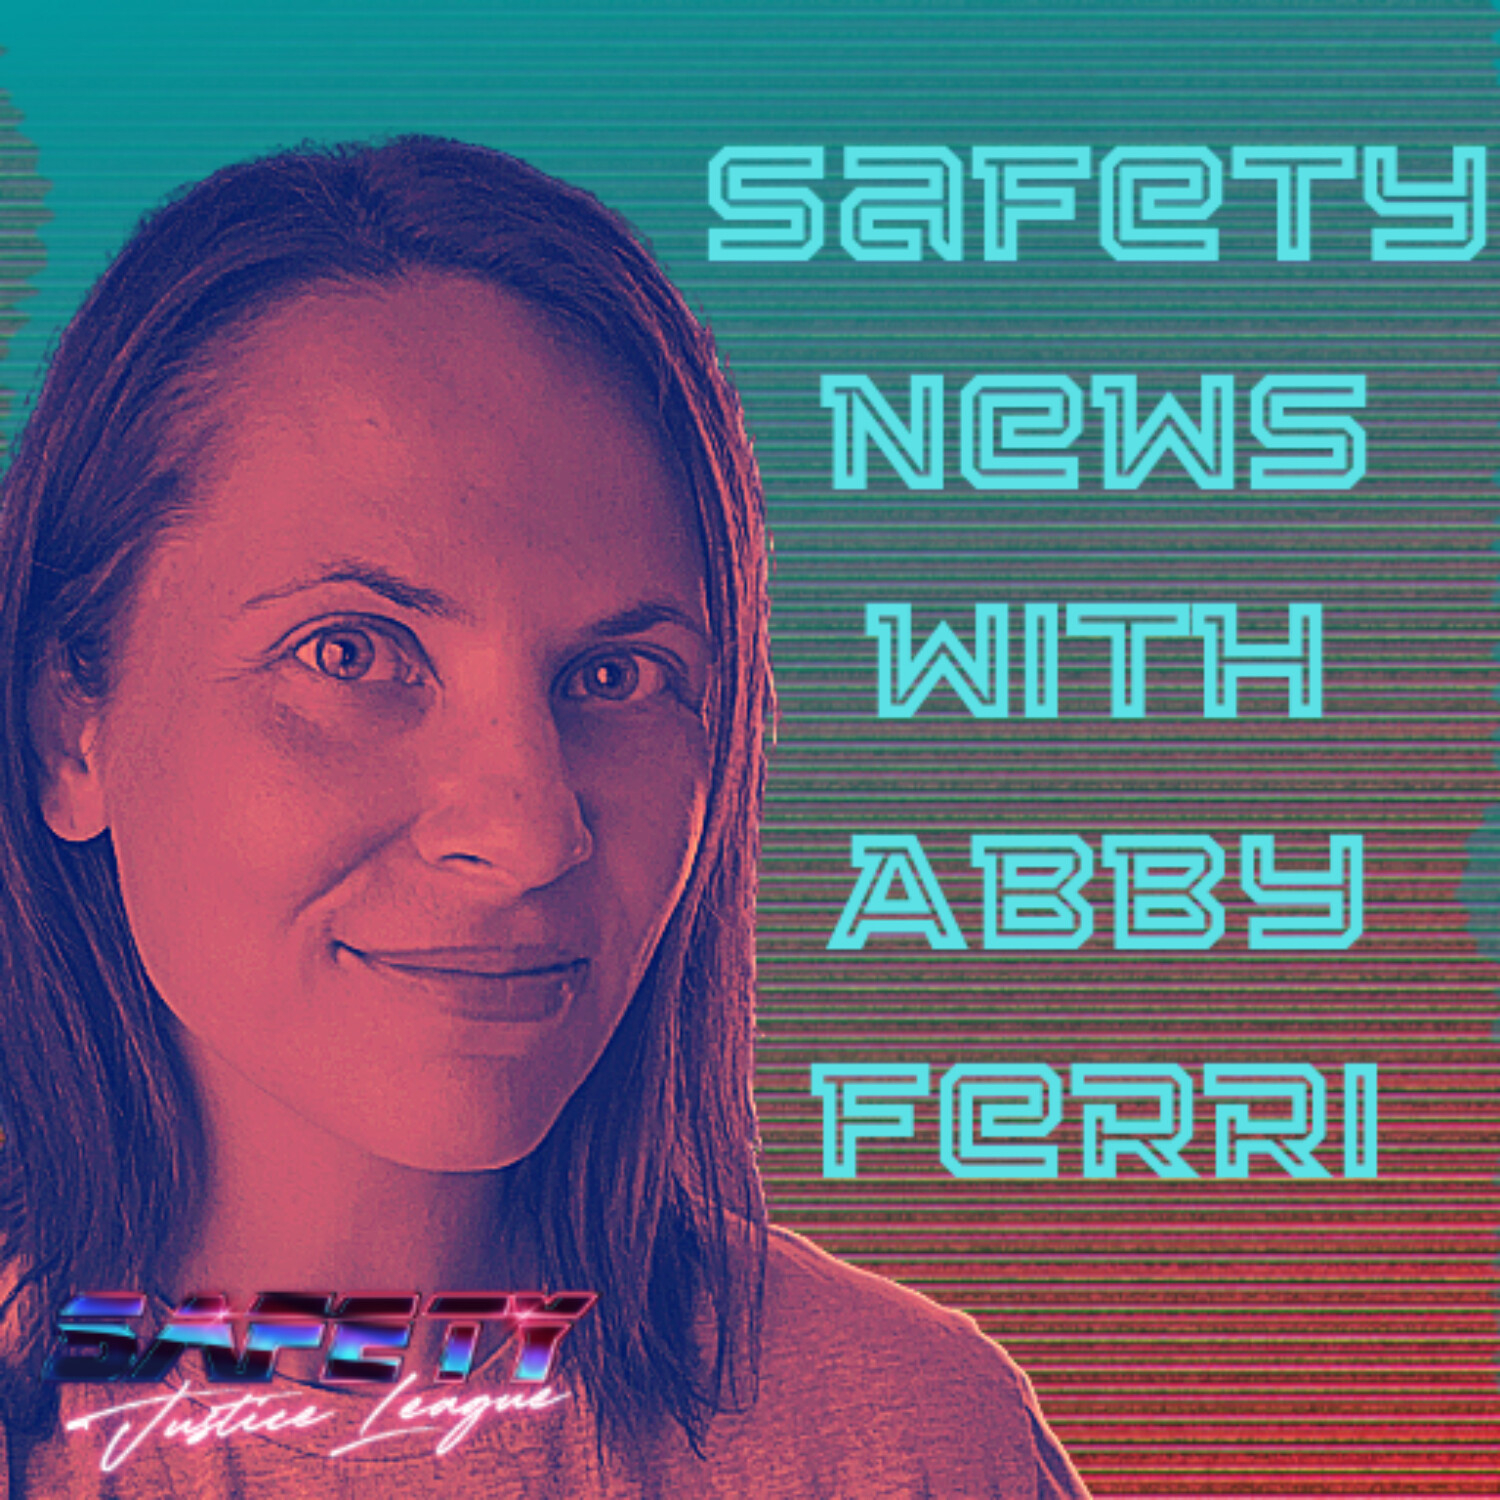 SJL Sh0rts: Safety News with Abby Ferri - July 6th Edition